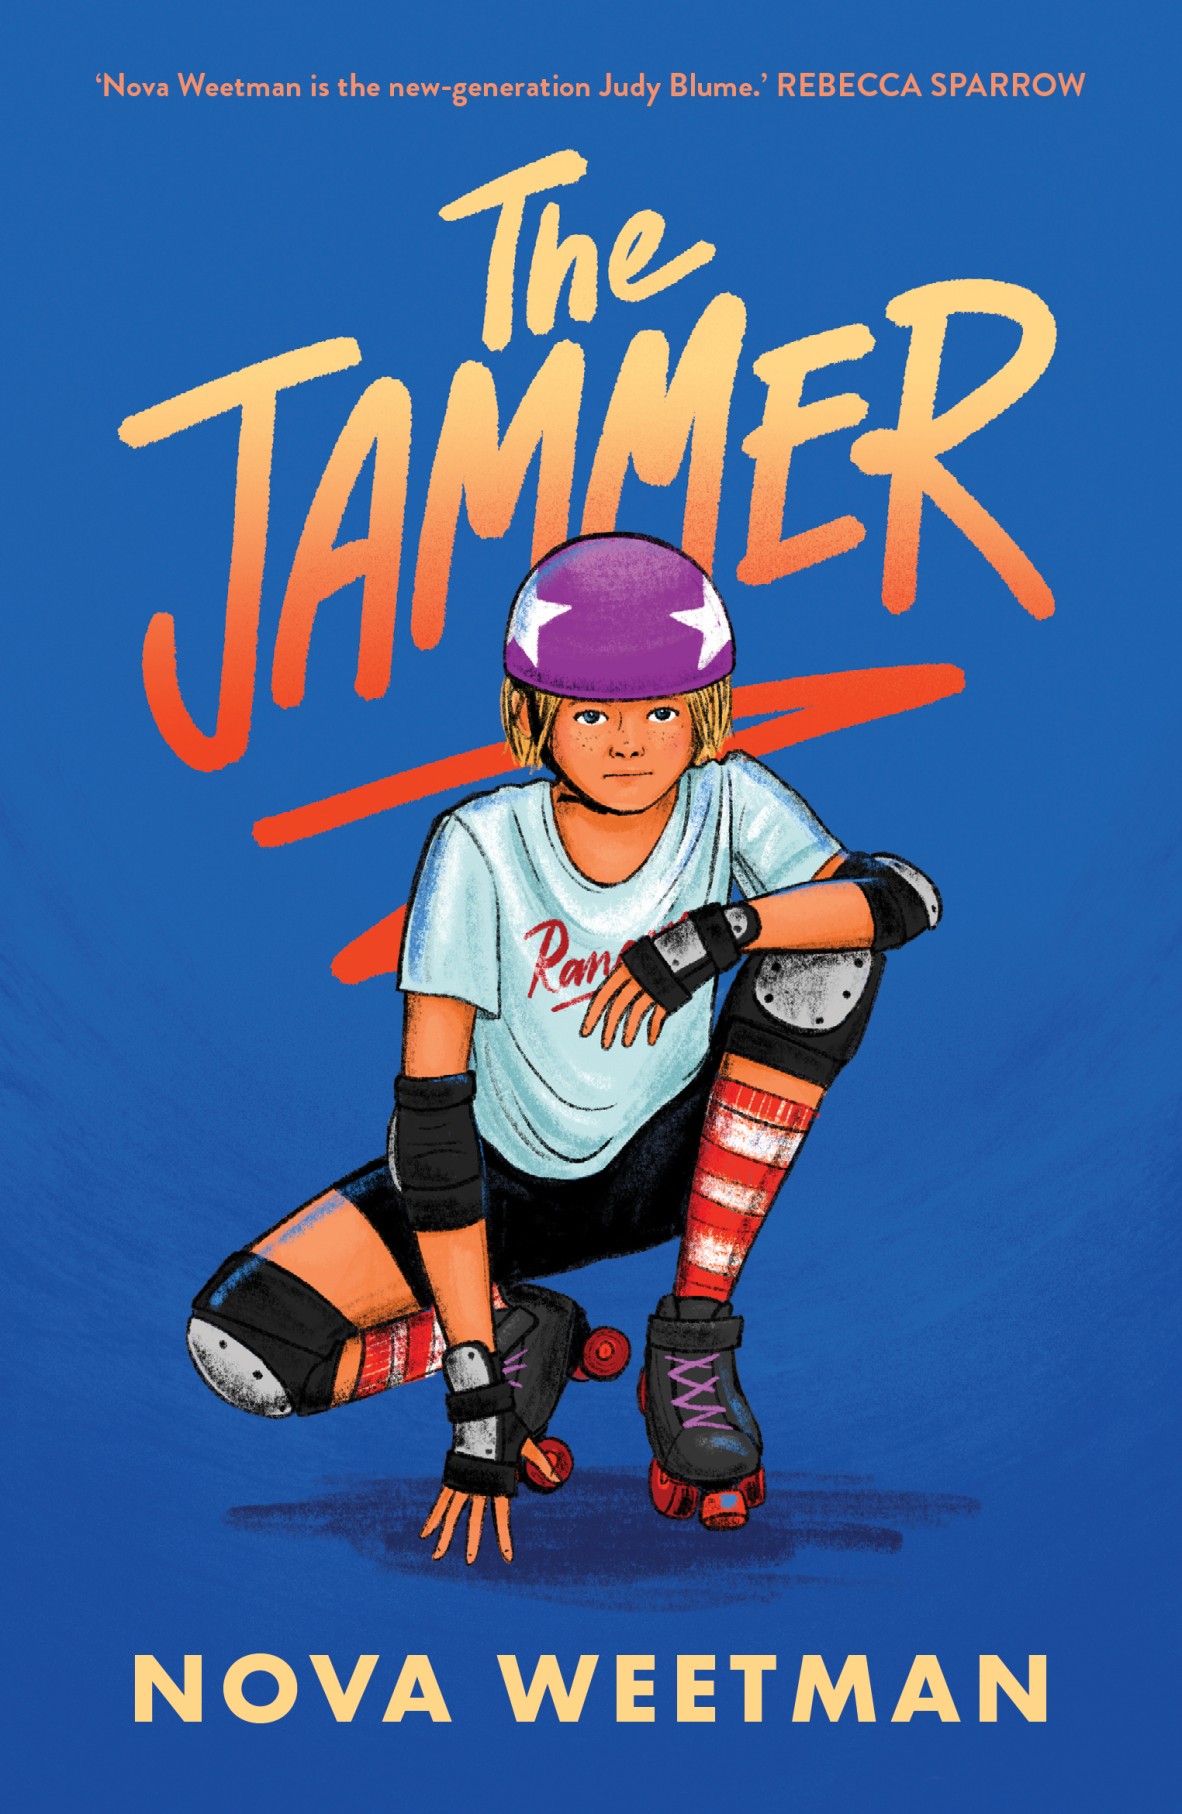 Cover of The Jammer by Nova Weetman The cover is blue and an illustration of a blonde girl wearing roller skates and helmet is on the front